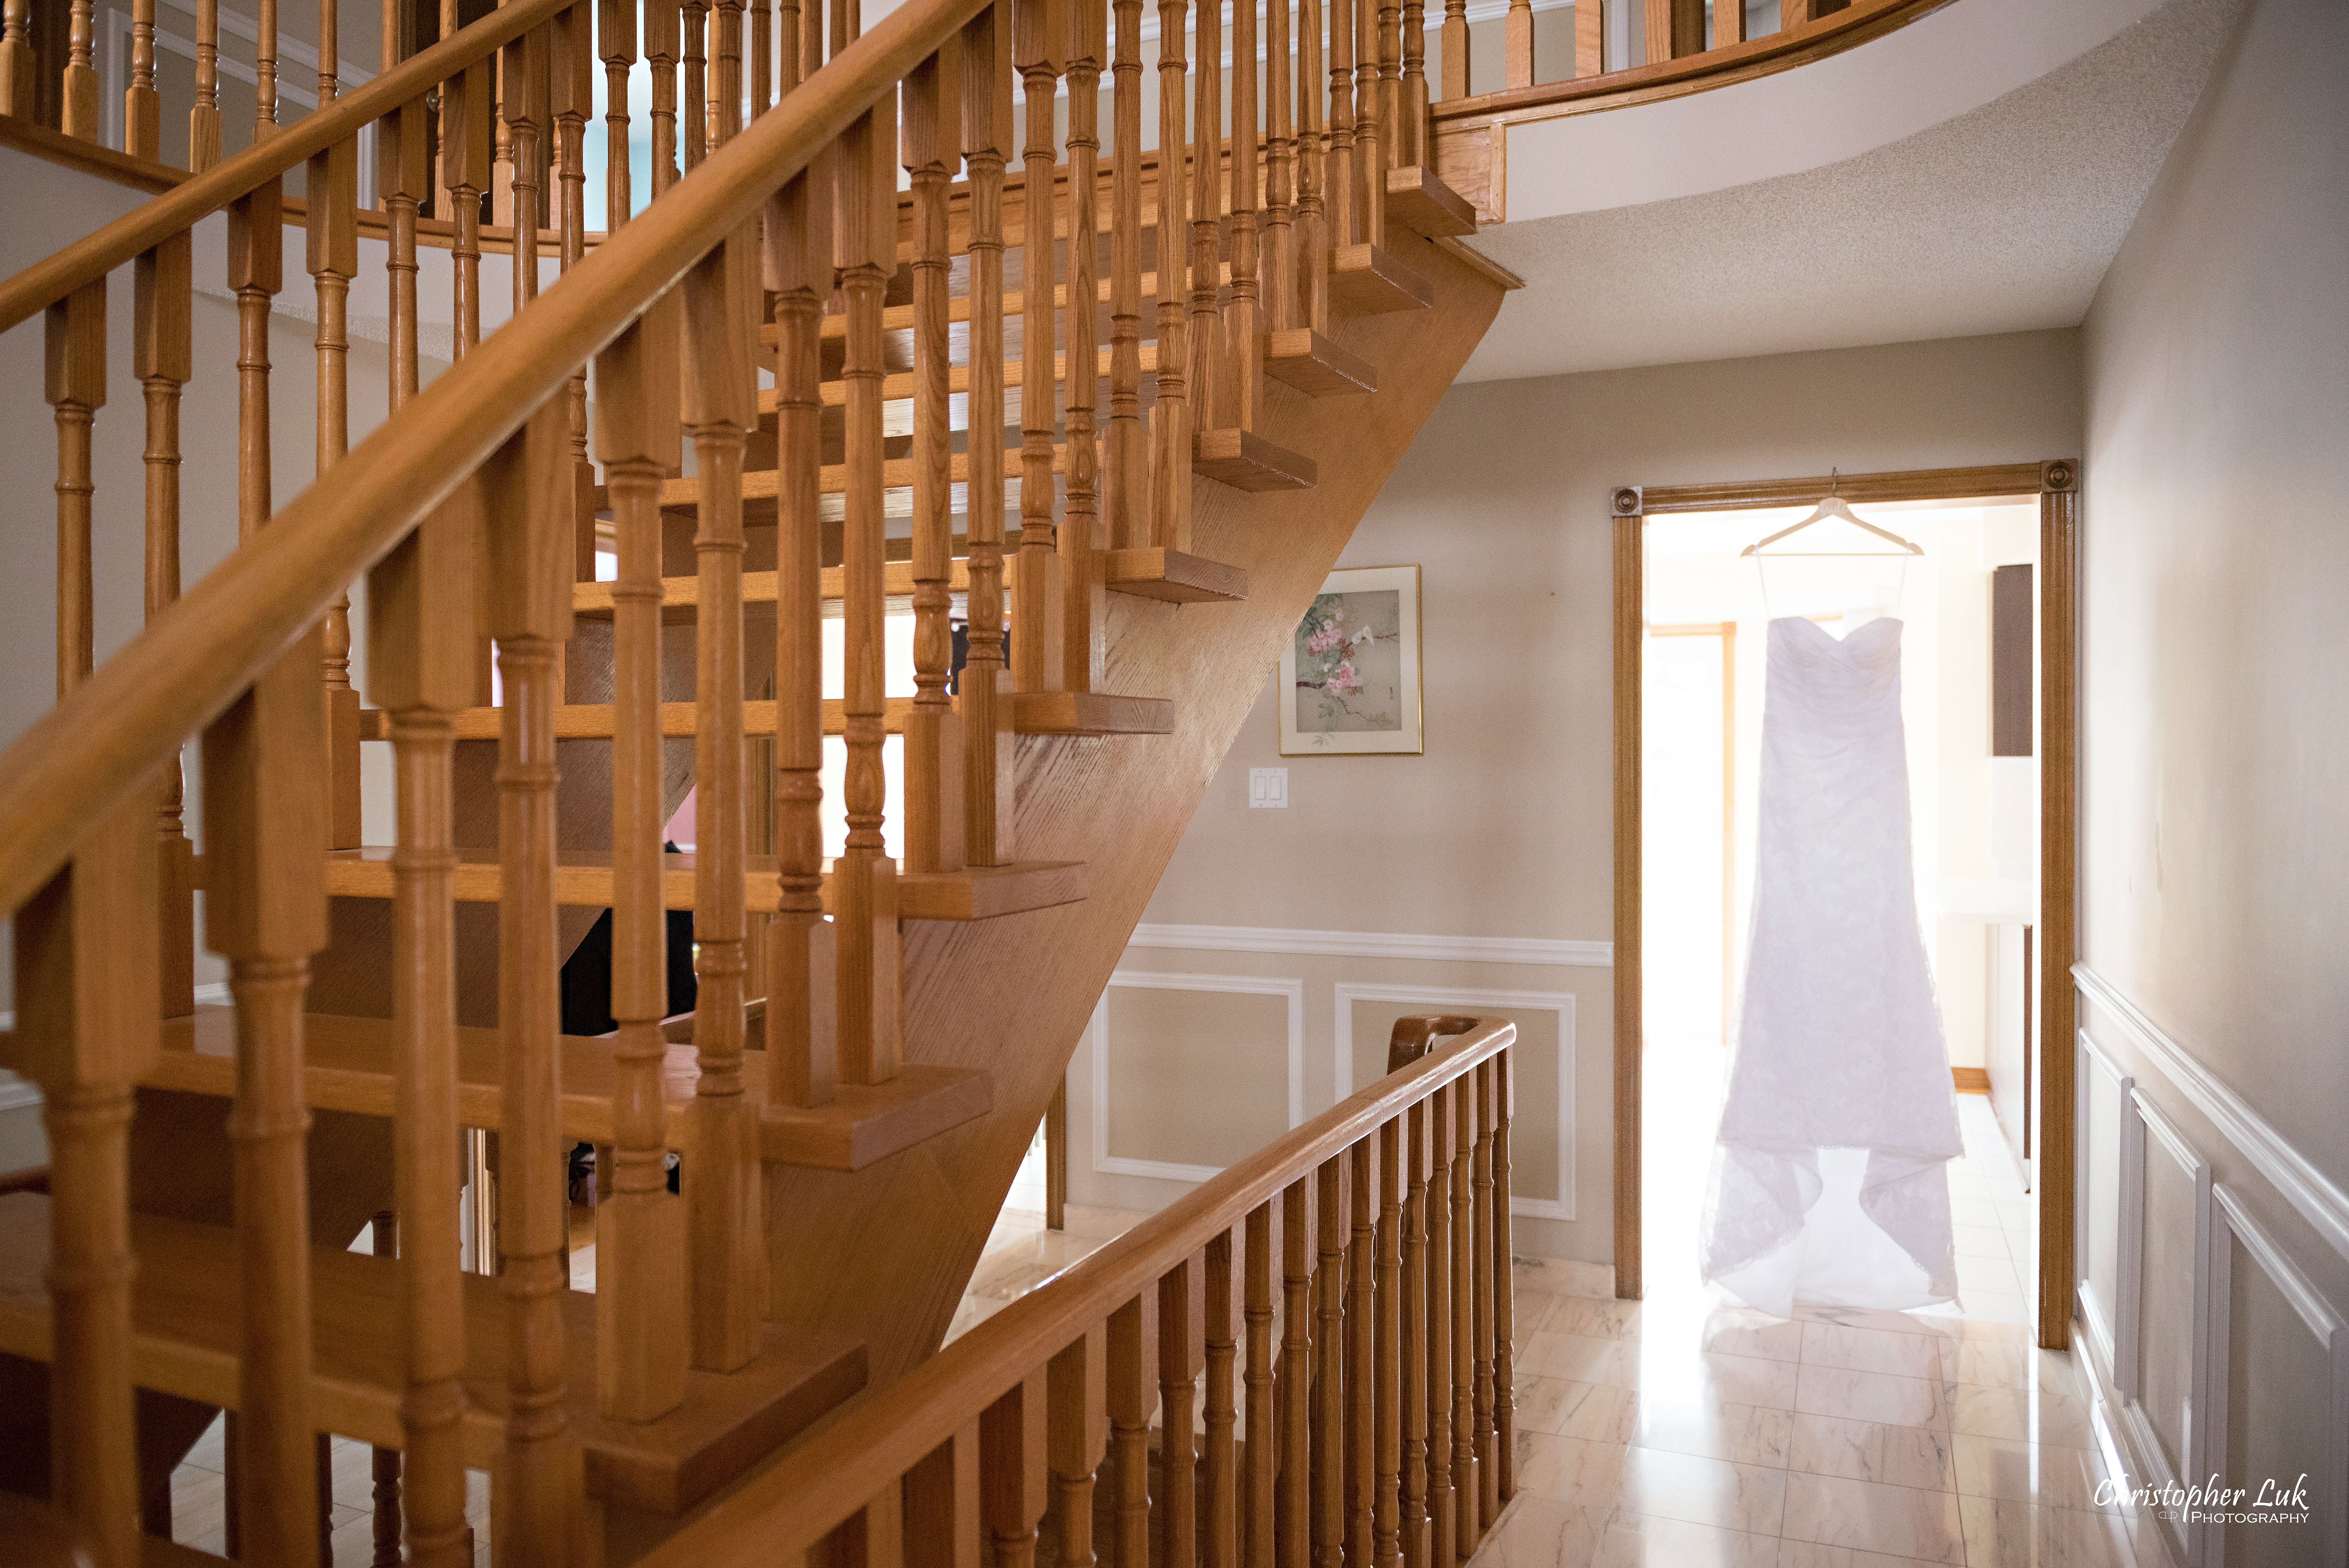 Christopher Luk - Toronto Wedding Photographer - Markham Home Private Residence Bride Alfred Angelo from Joanna’s Bridal Natural Candid Photojournalistic Creative Staircase Leading Line White Dress